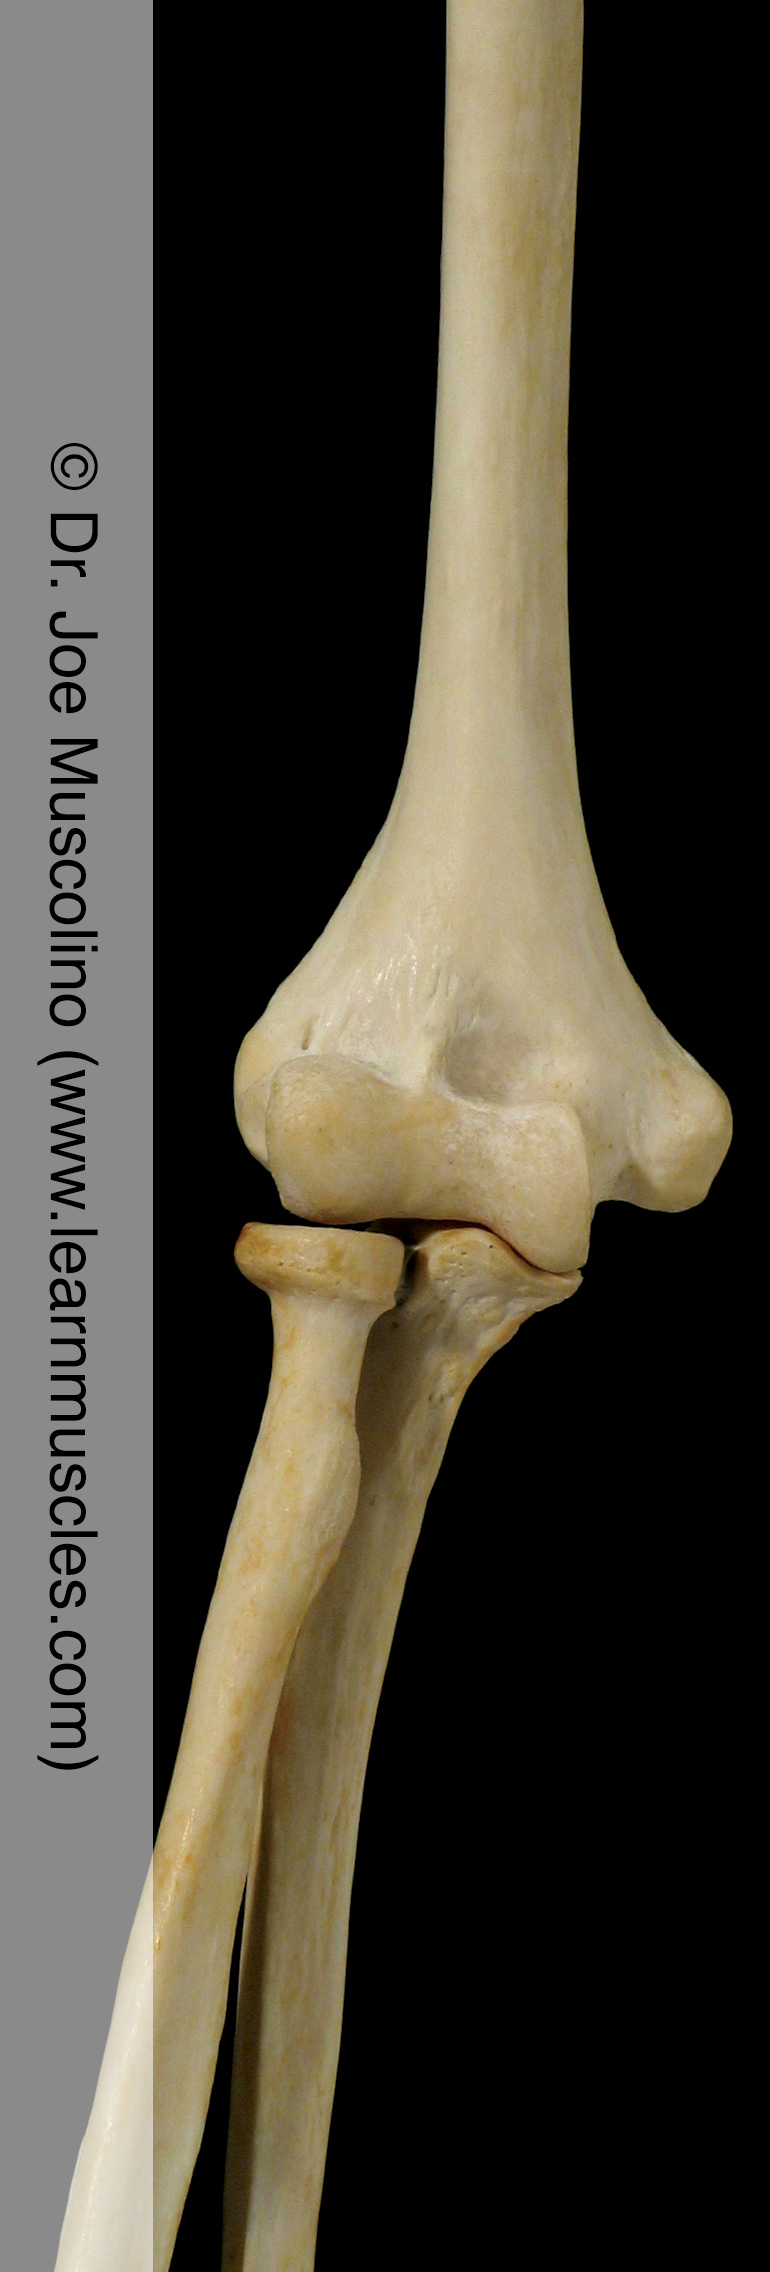 humeroradial joint